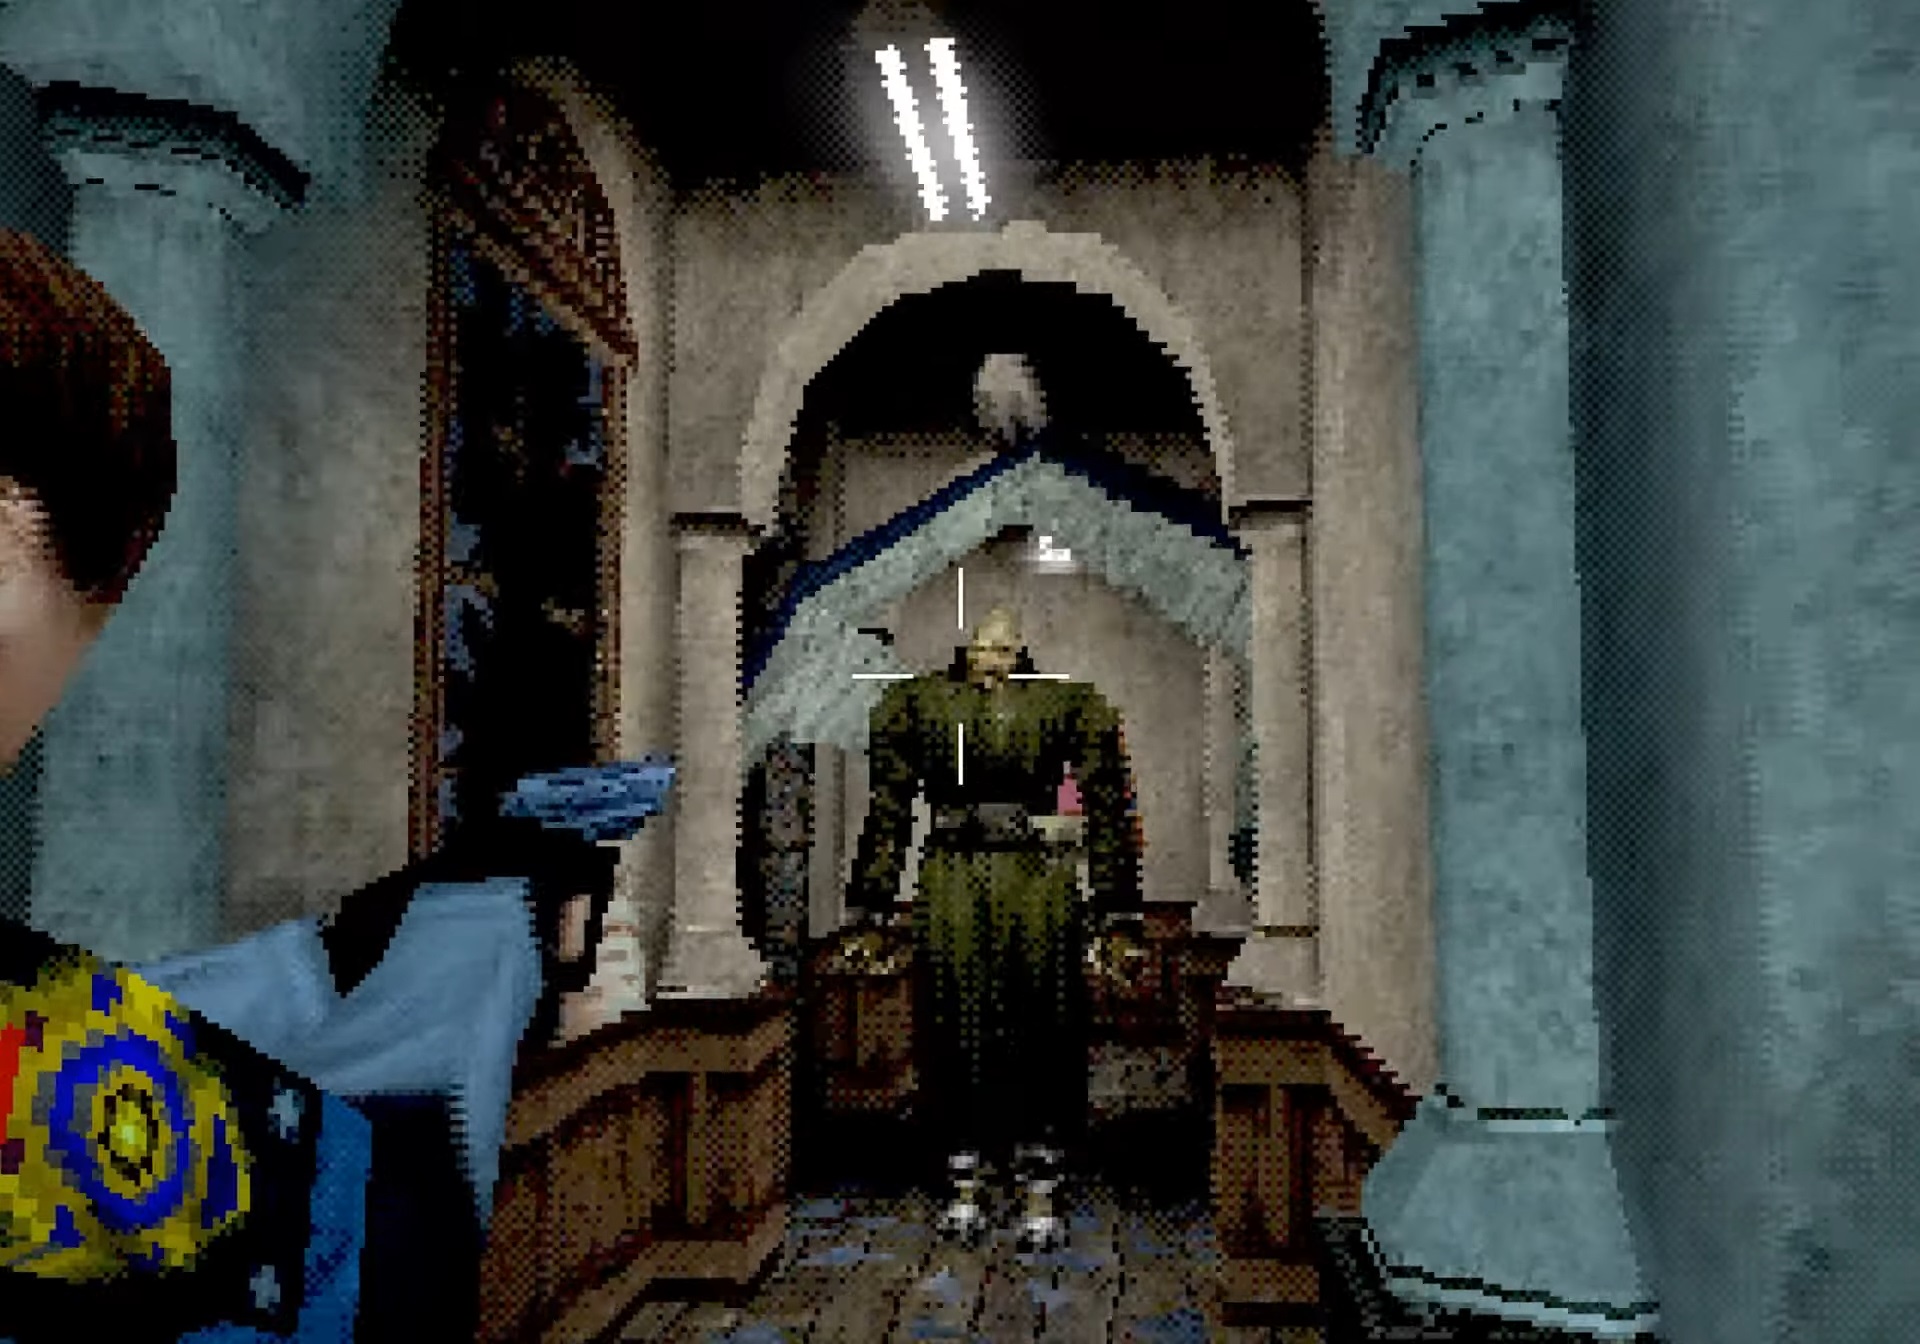 PS1-style Resident Evil 2 with over-the-shoulder camera